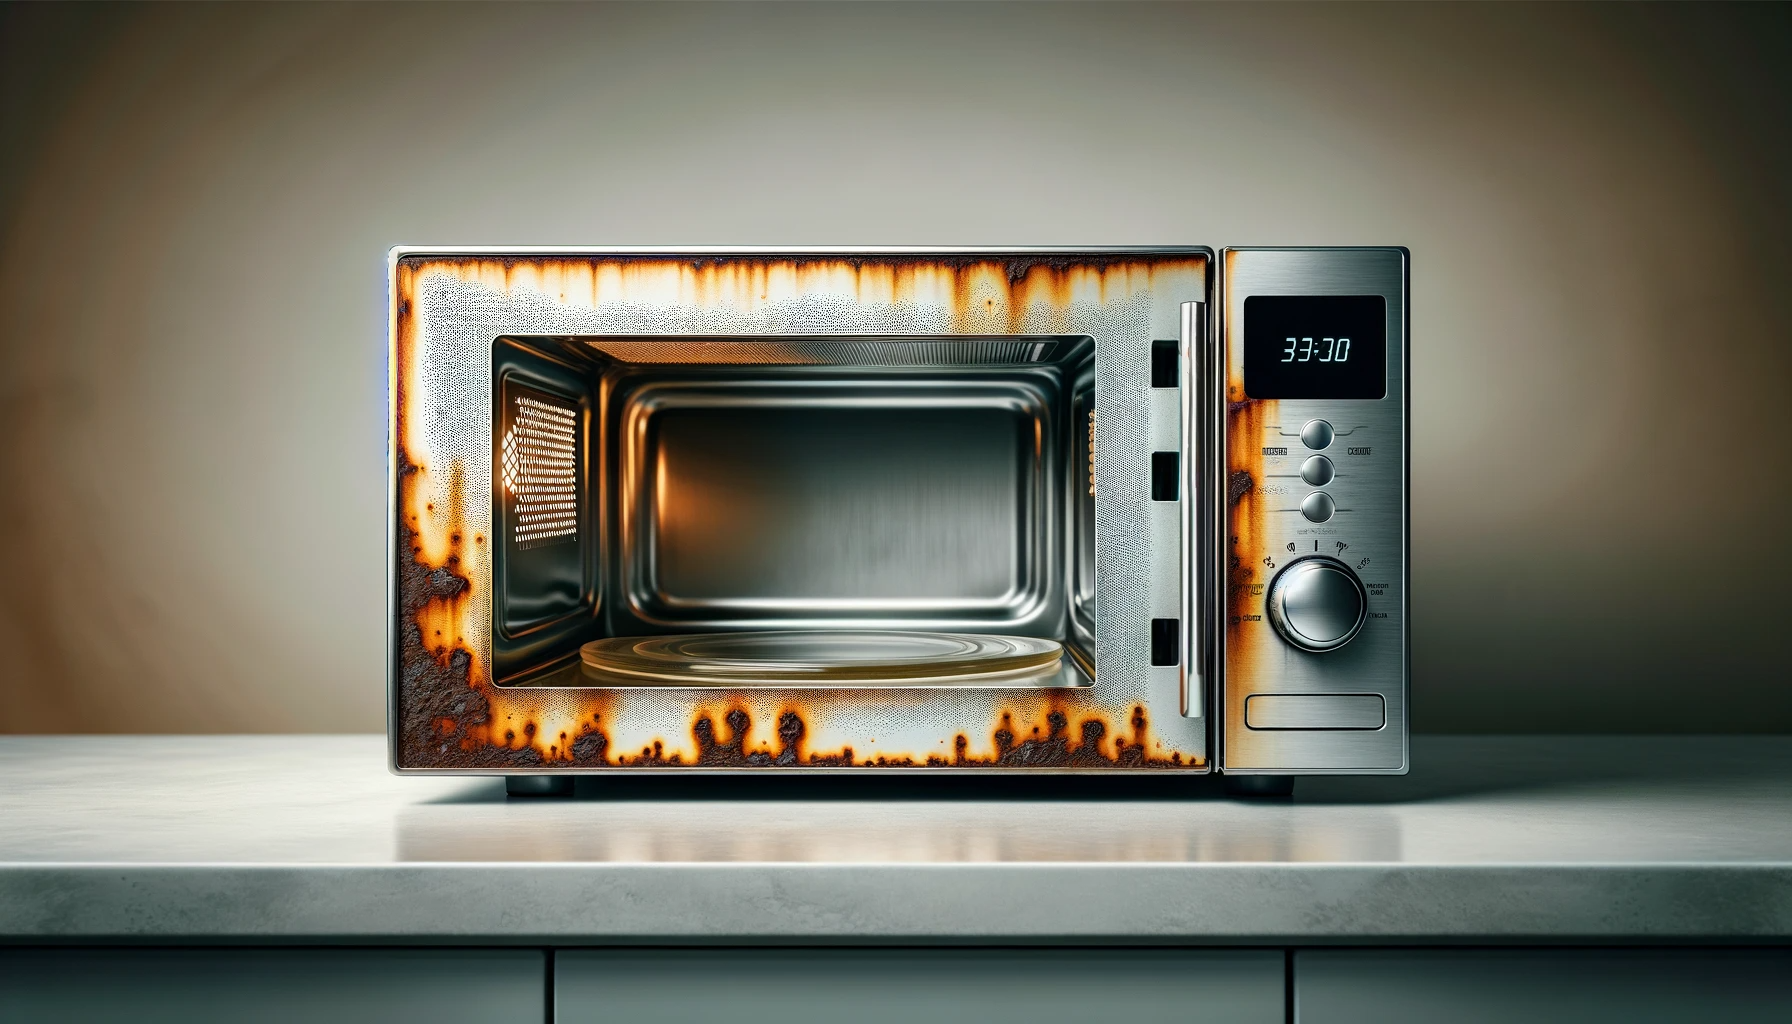 Why Microwave Rusts Inside? Here is how to avoid it